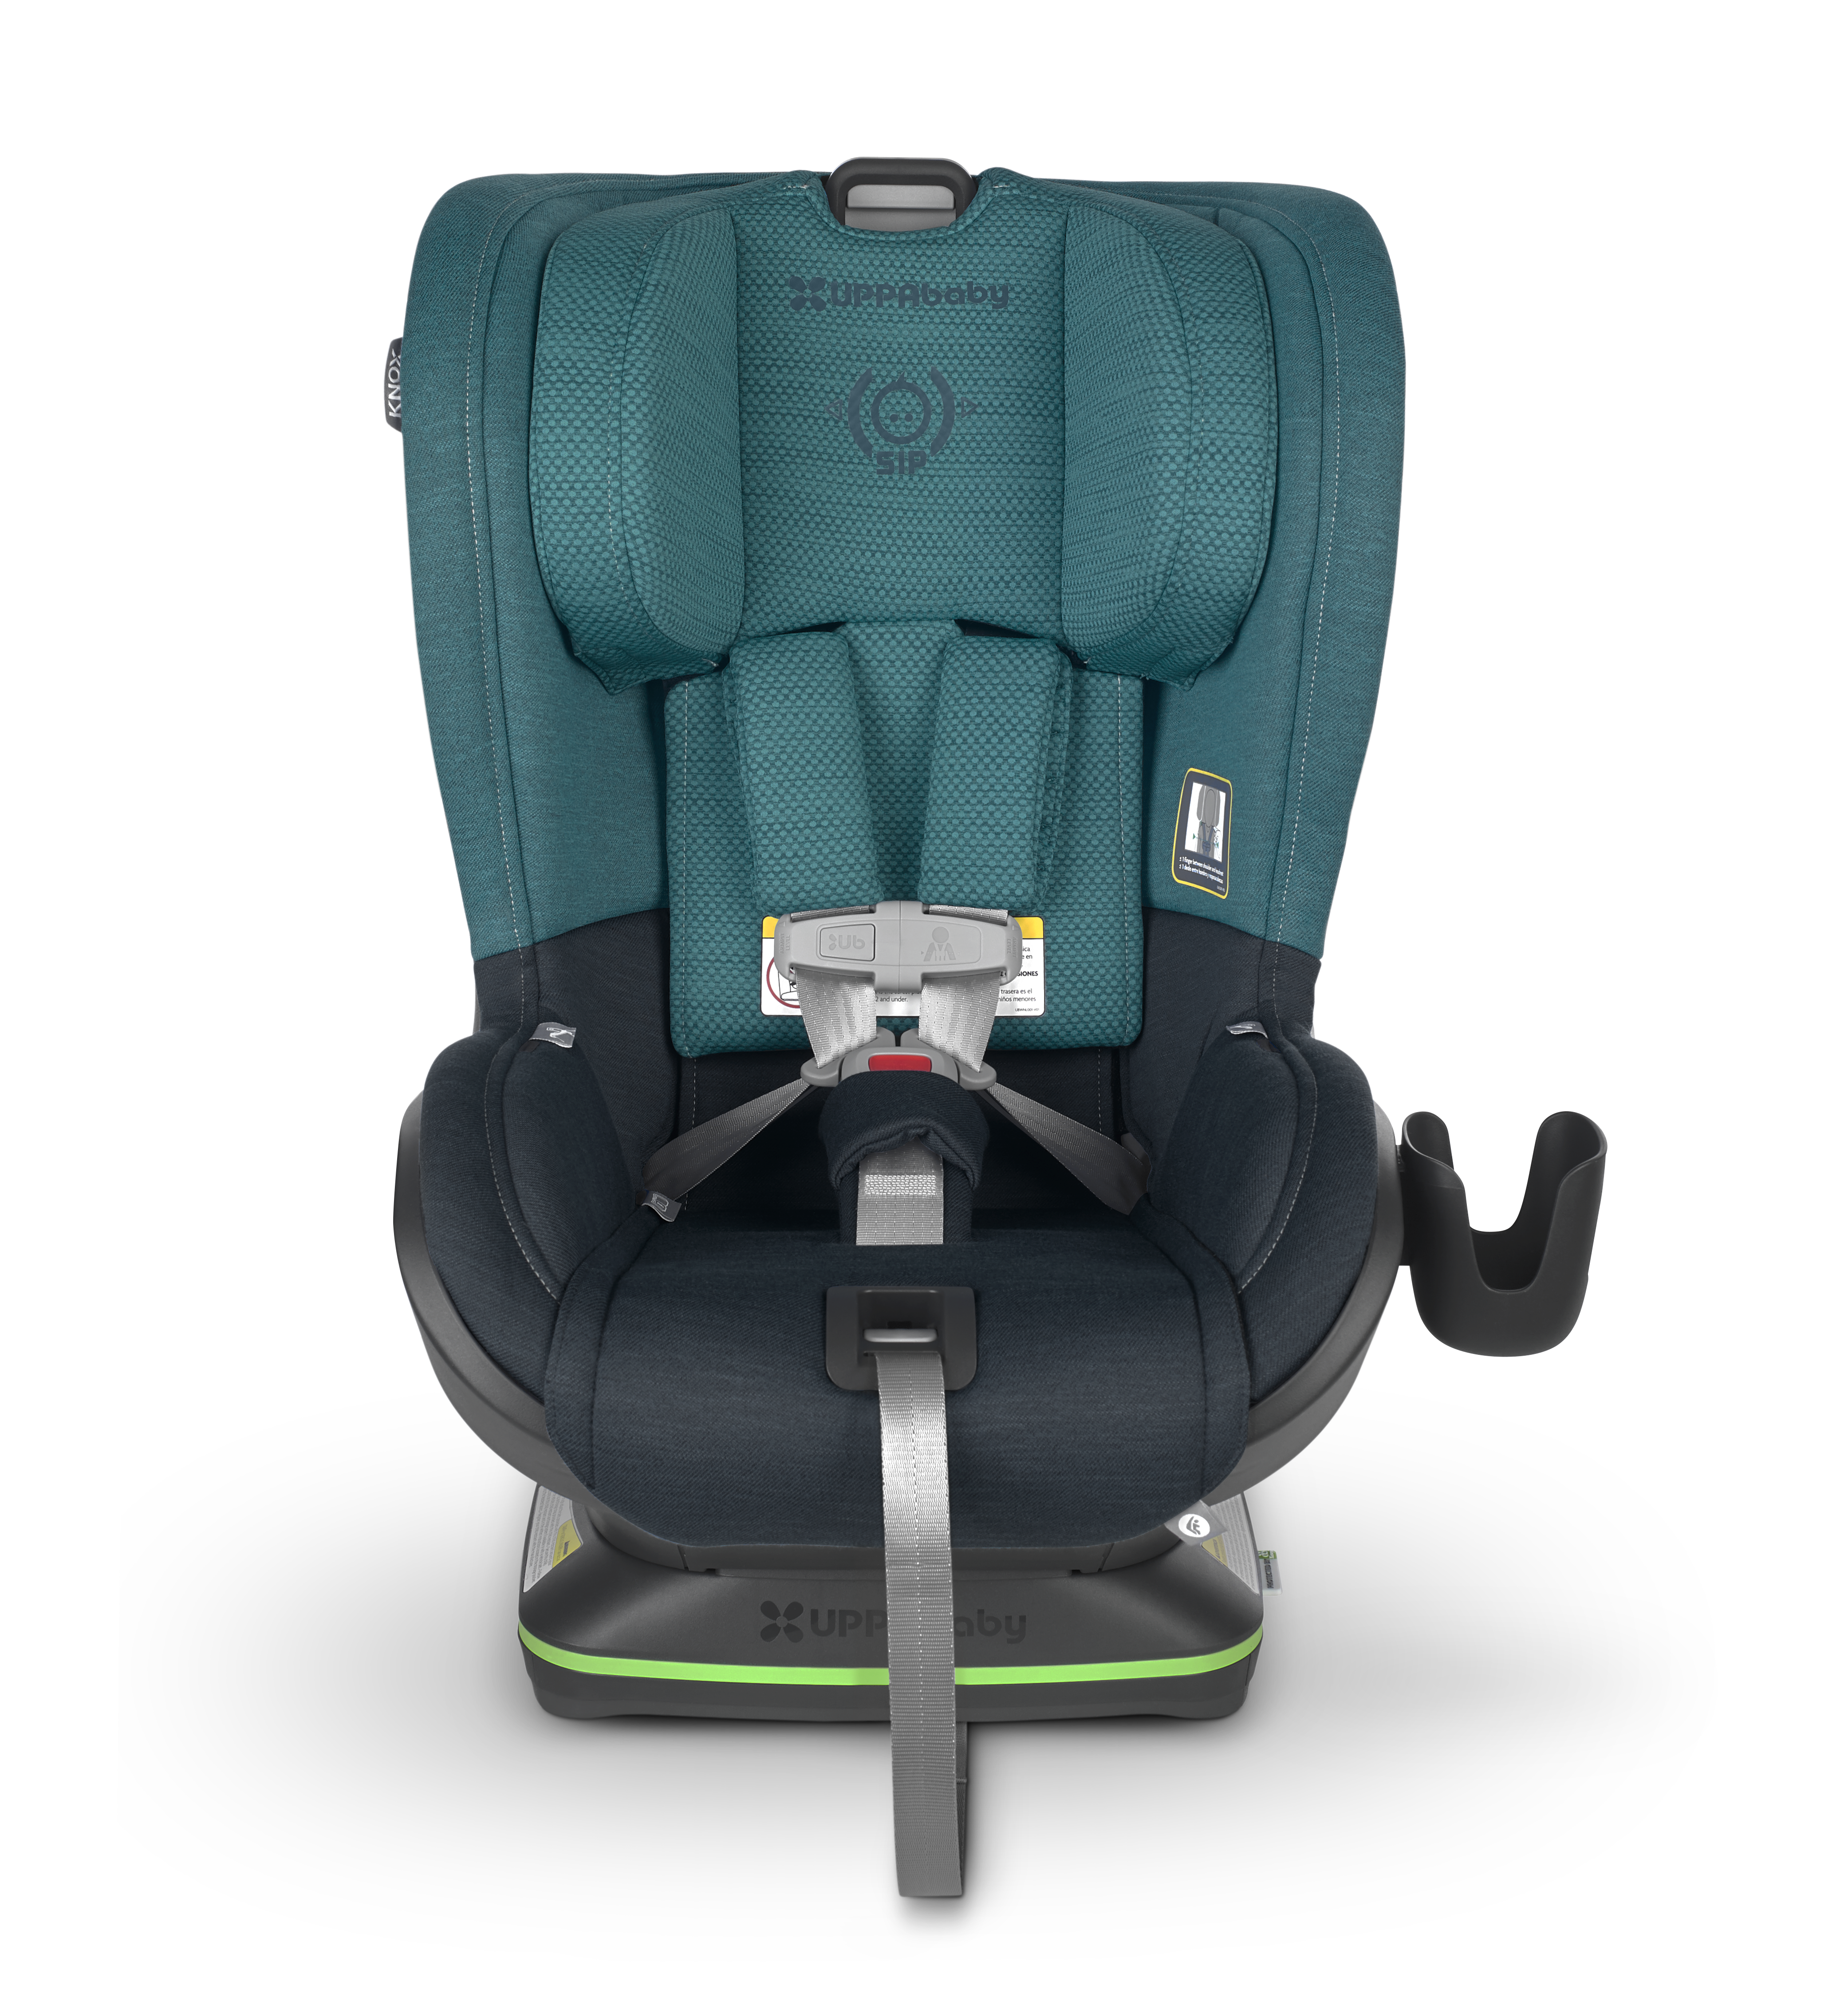 UPPAbaby KNOX with Cup Holder